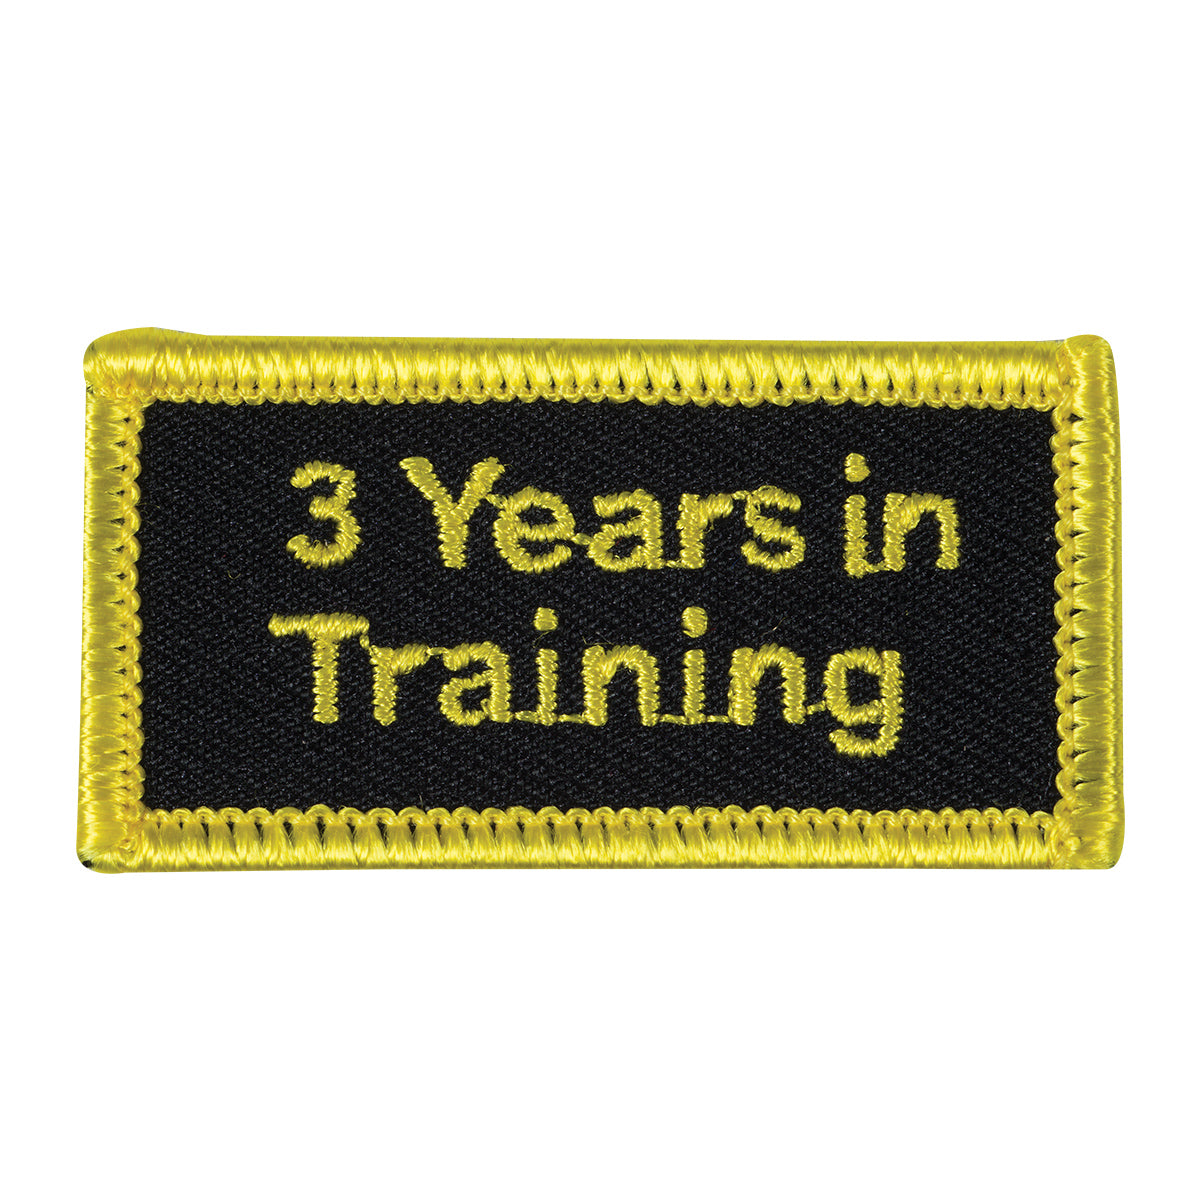 3 Years in Training Patch